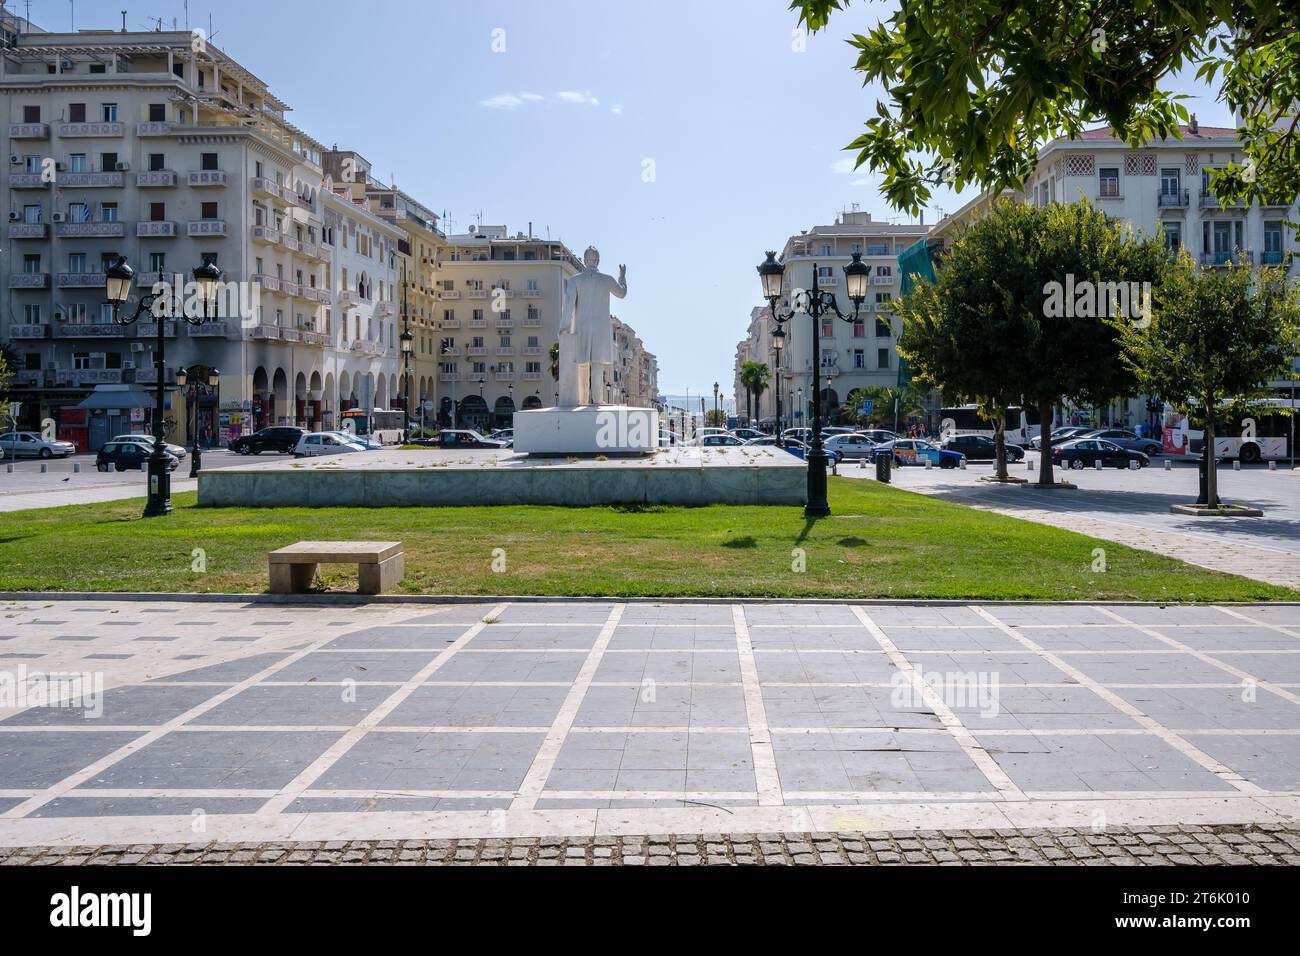 Thessaloniki, Greece - September 22, 2023 : The statue of Eleftherios Venizelos, the Greek statesman and view of the Aristotelous Square Stock Photo